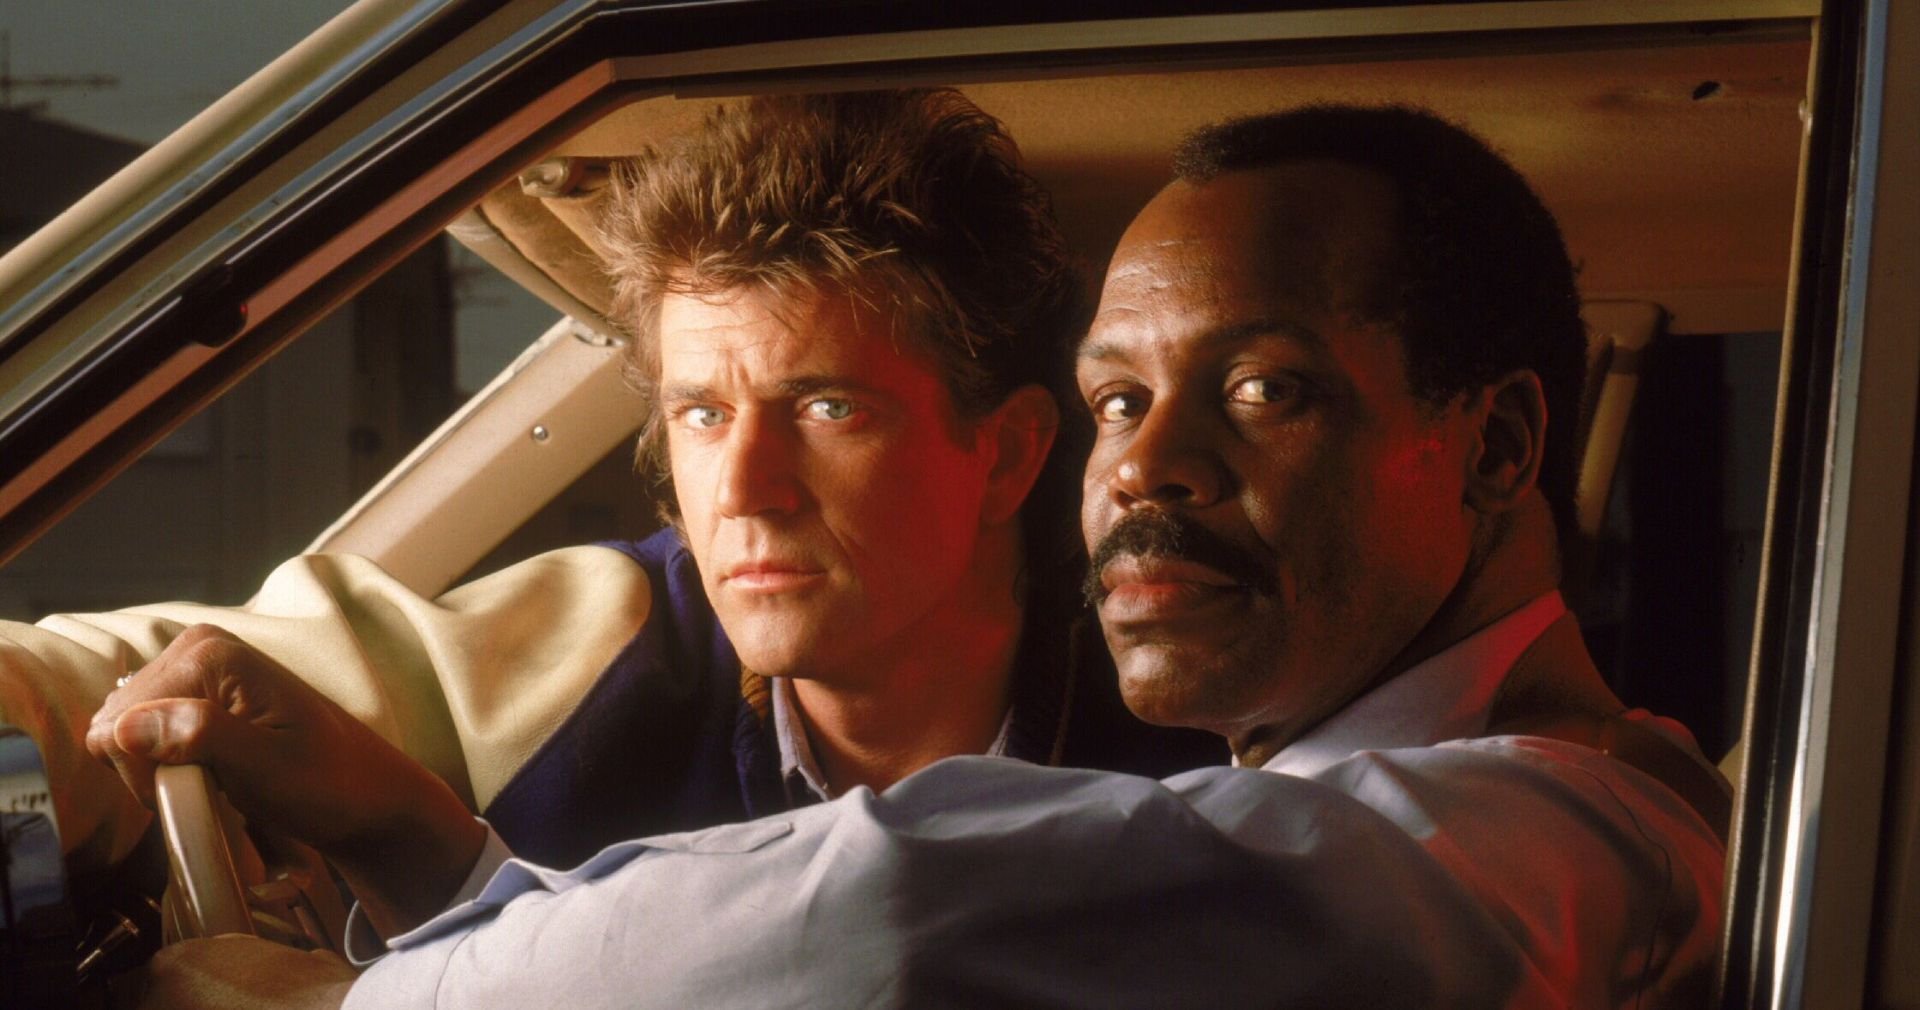 Lethal Weapon 5 Is Being Worked on Right Now Confirms Mel Gibson